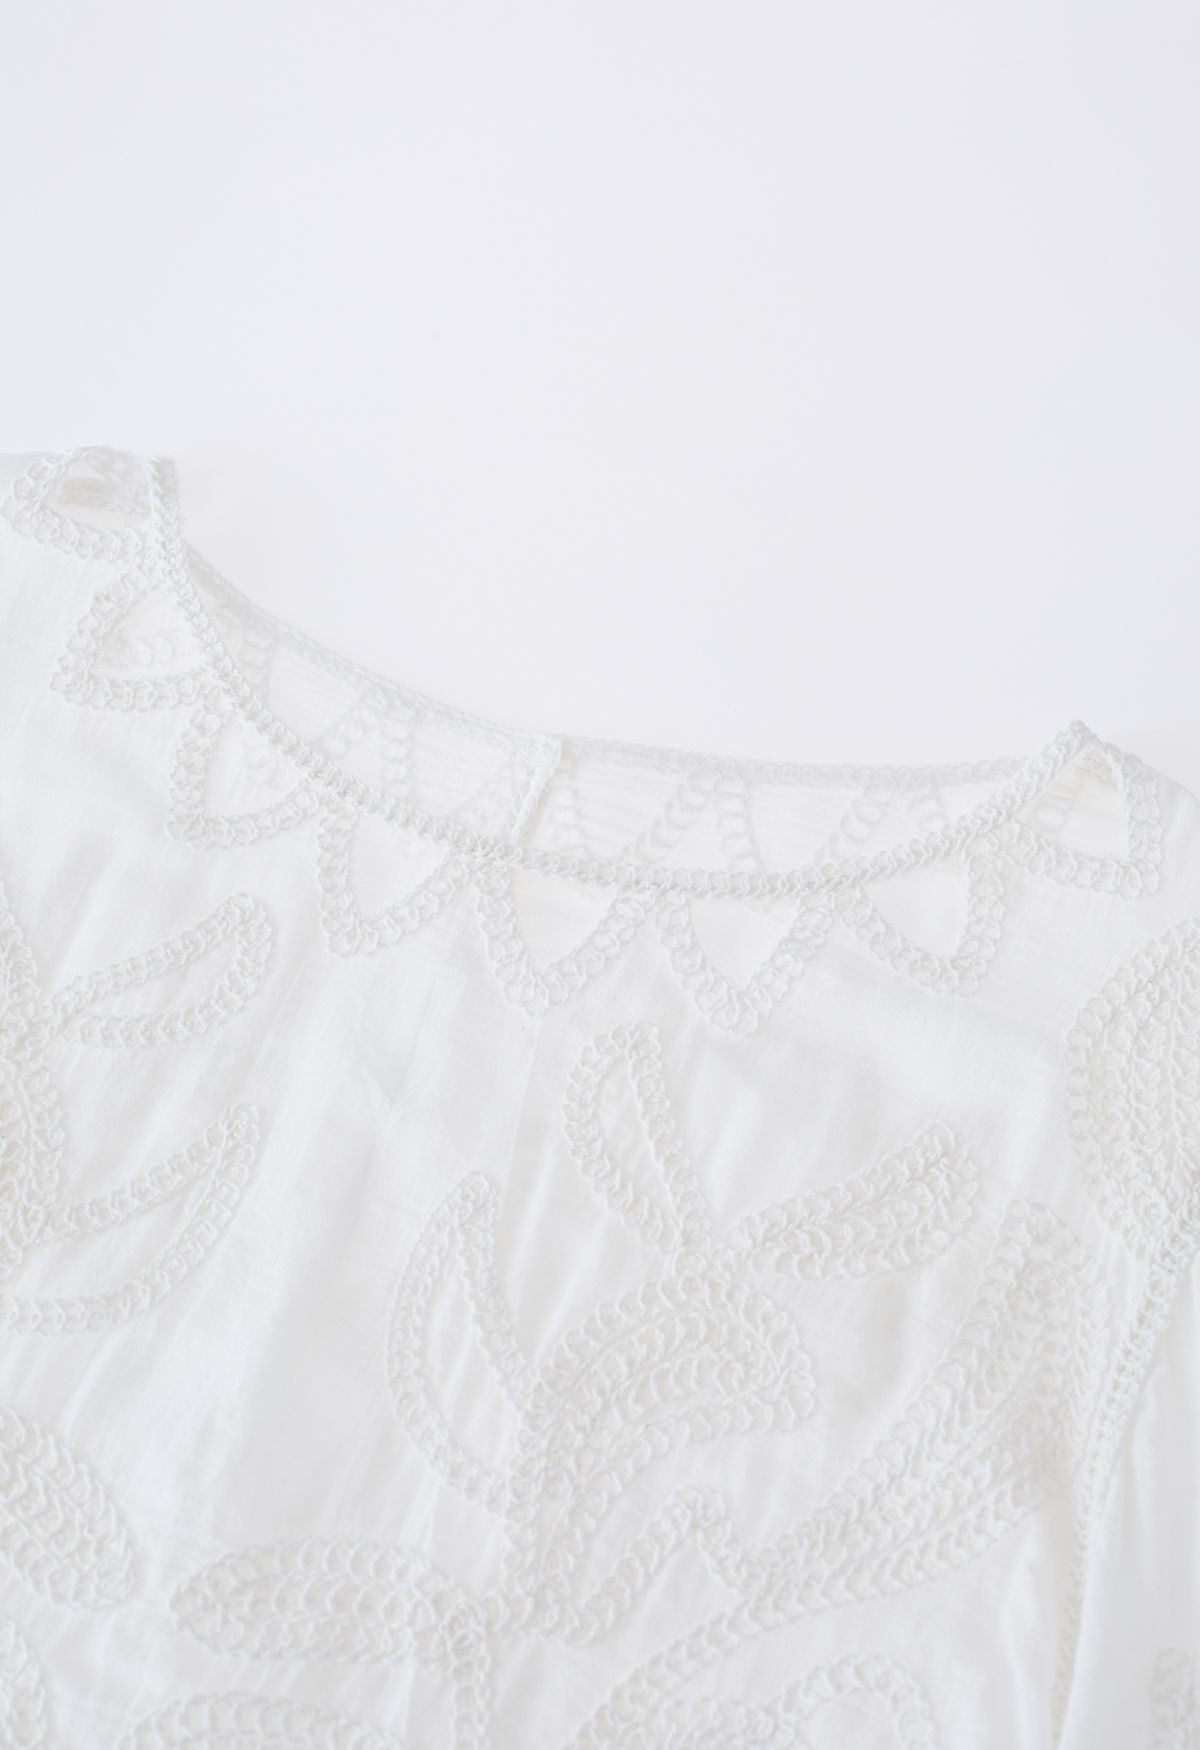 Cutwork Trim Grass Embroidered Top in White